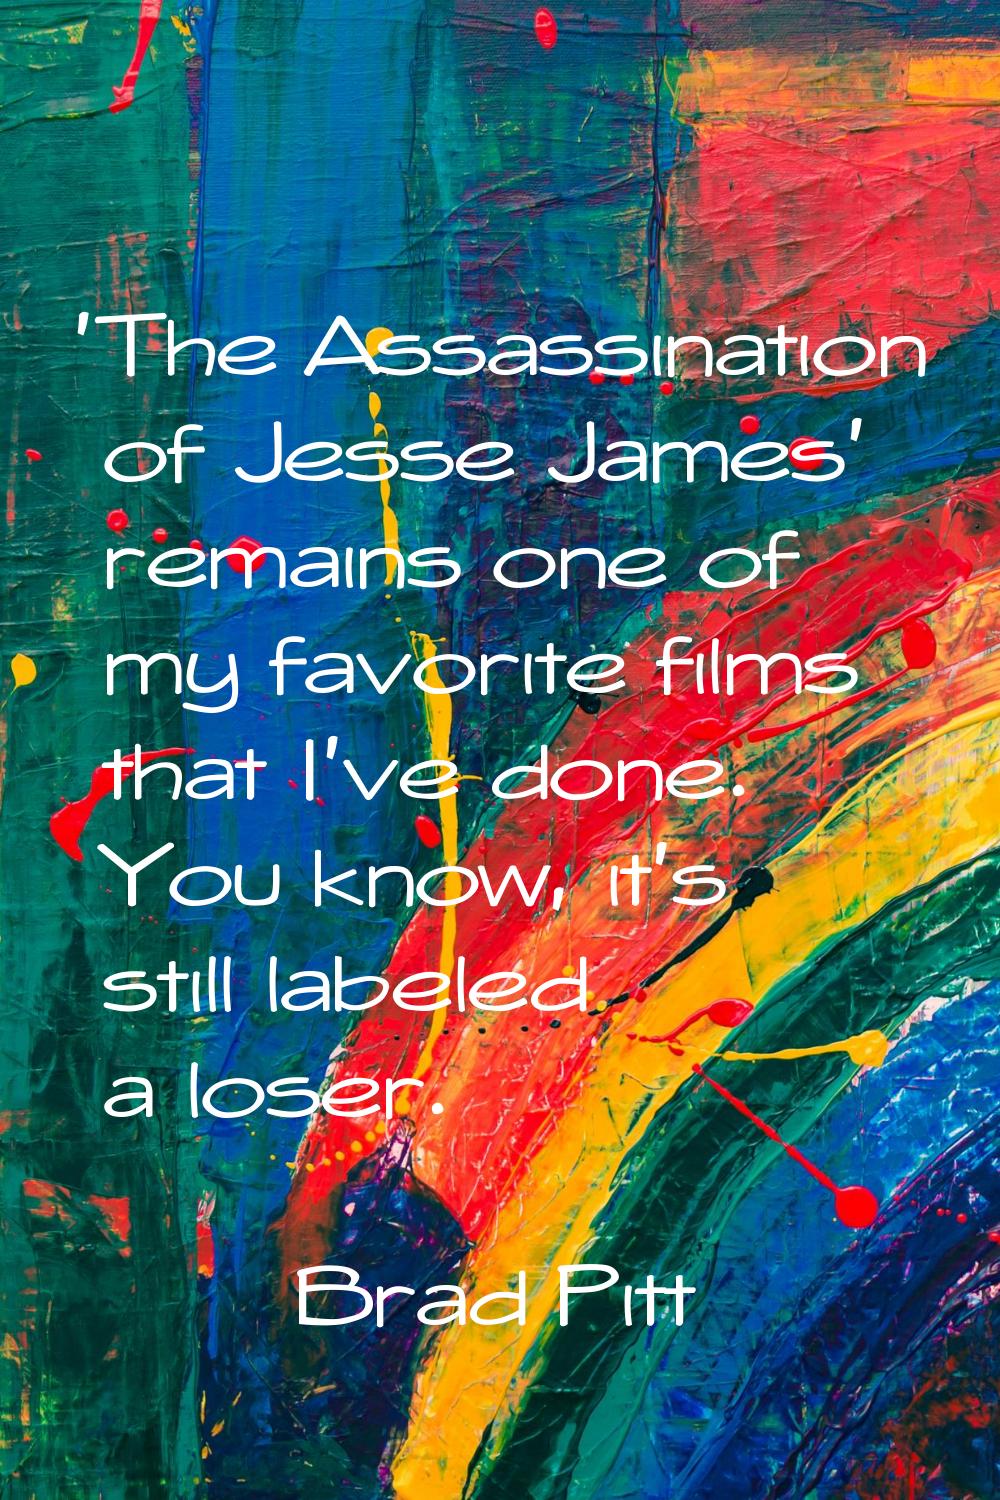 'The Assassination of Jesse James' remains one of my favorite films that I've done. You know, it's 